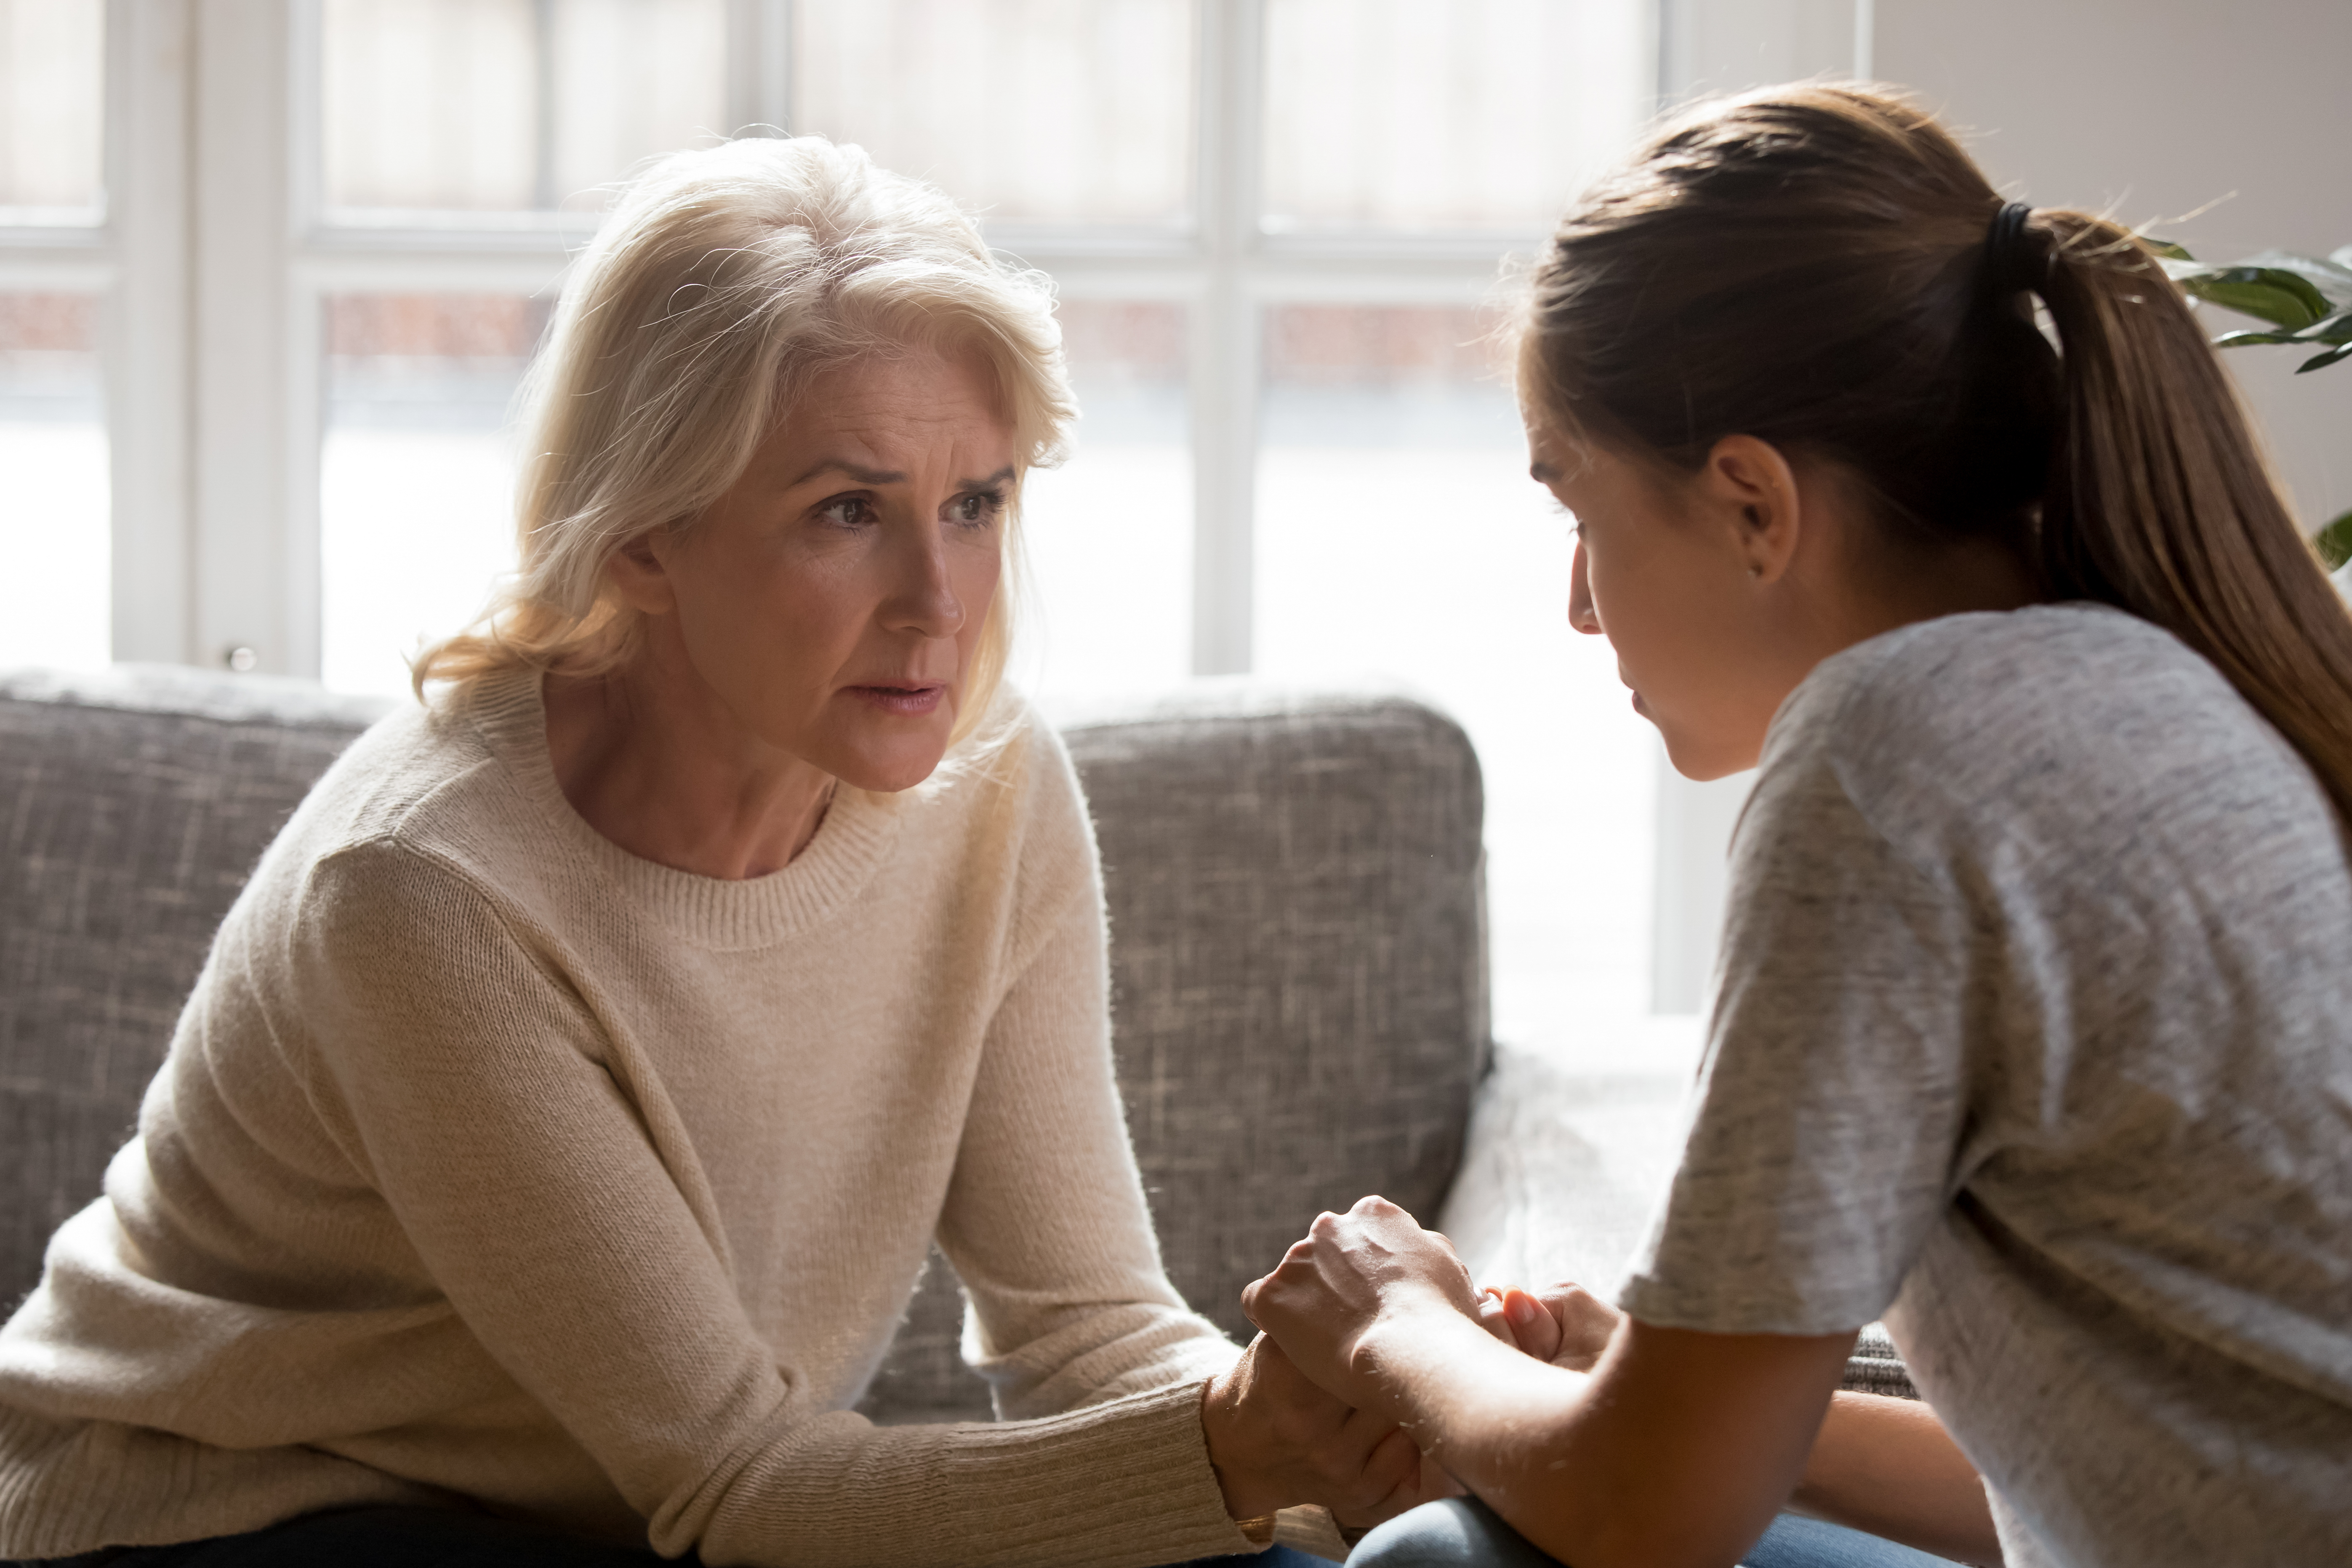 A senior woman talking seriously to a young woman | Source: Shutterstock